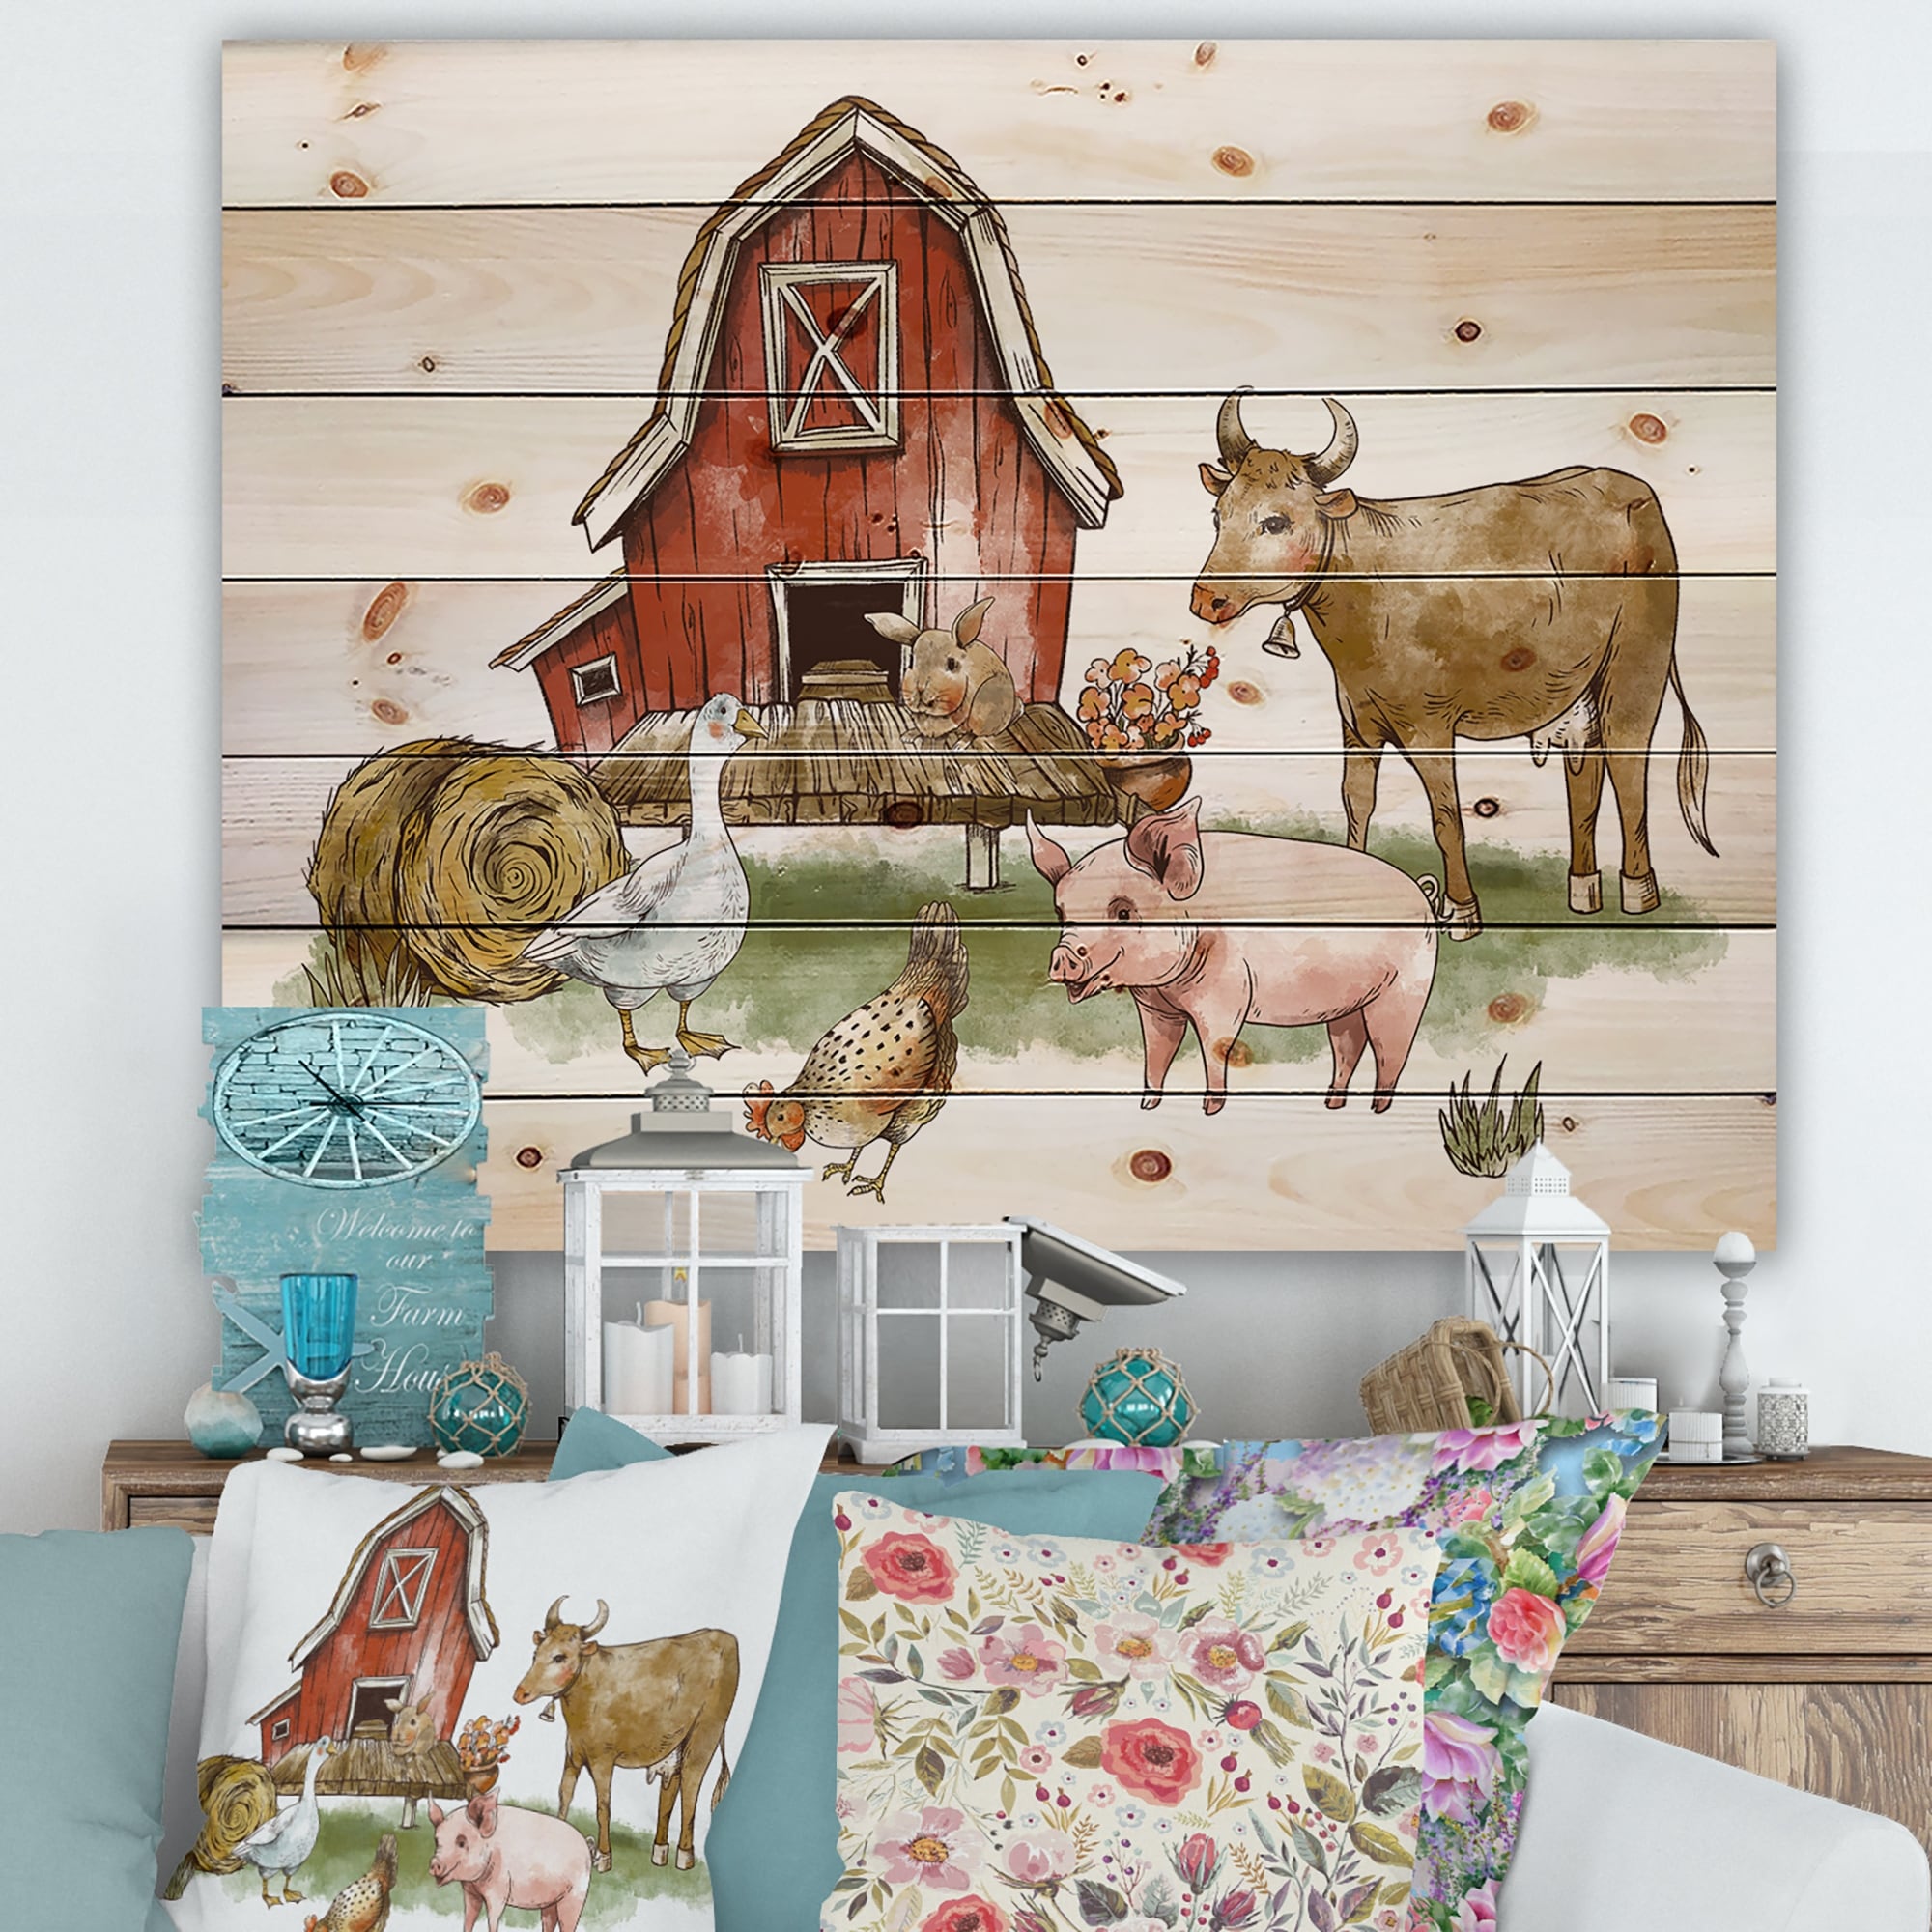 https://ak1.ostkcdn.com/images/products/is/images/direct/7842c92a41b1f19cc627811d8d47633031207bf5/Designart-%27Farm-House-With-Goose-Chicken-Cow-Pig-and-Haystack%27-Rustic-Print-on-Natural-Pine-Wood.jpg